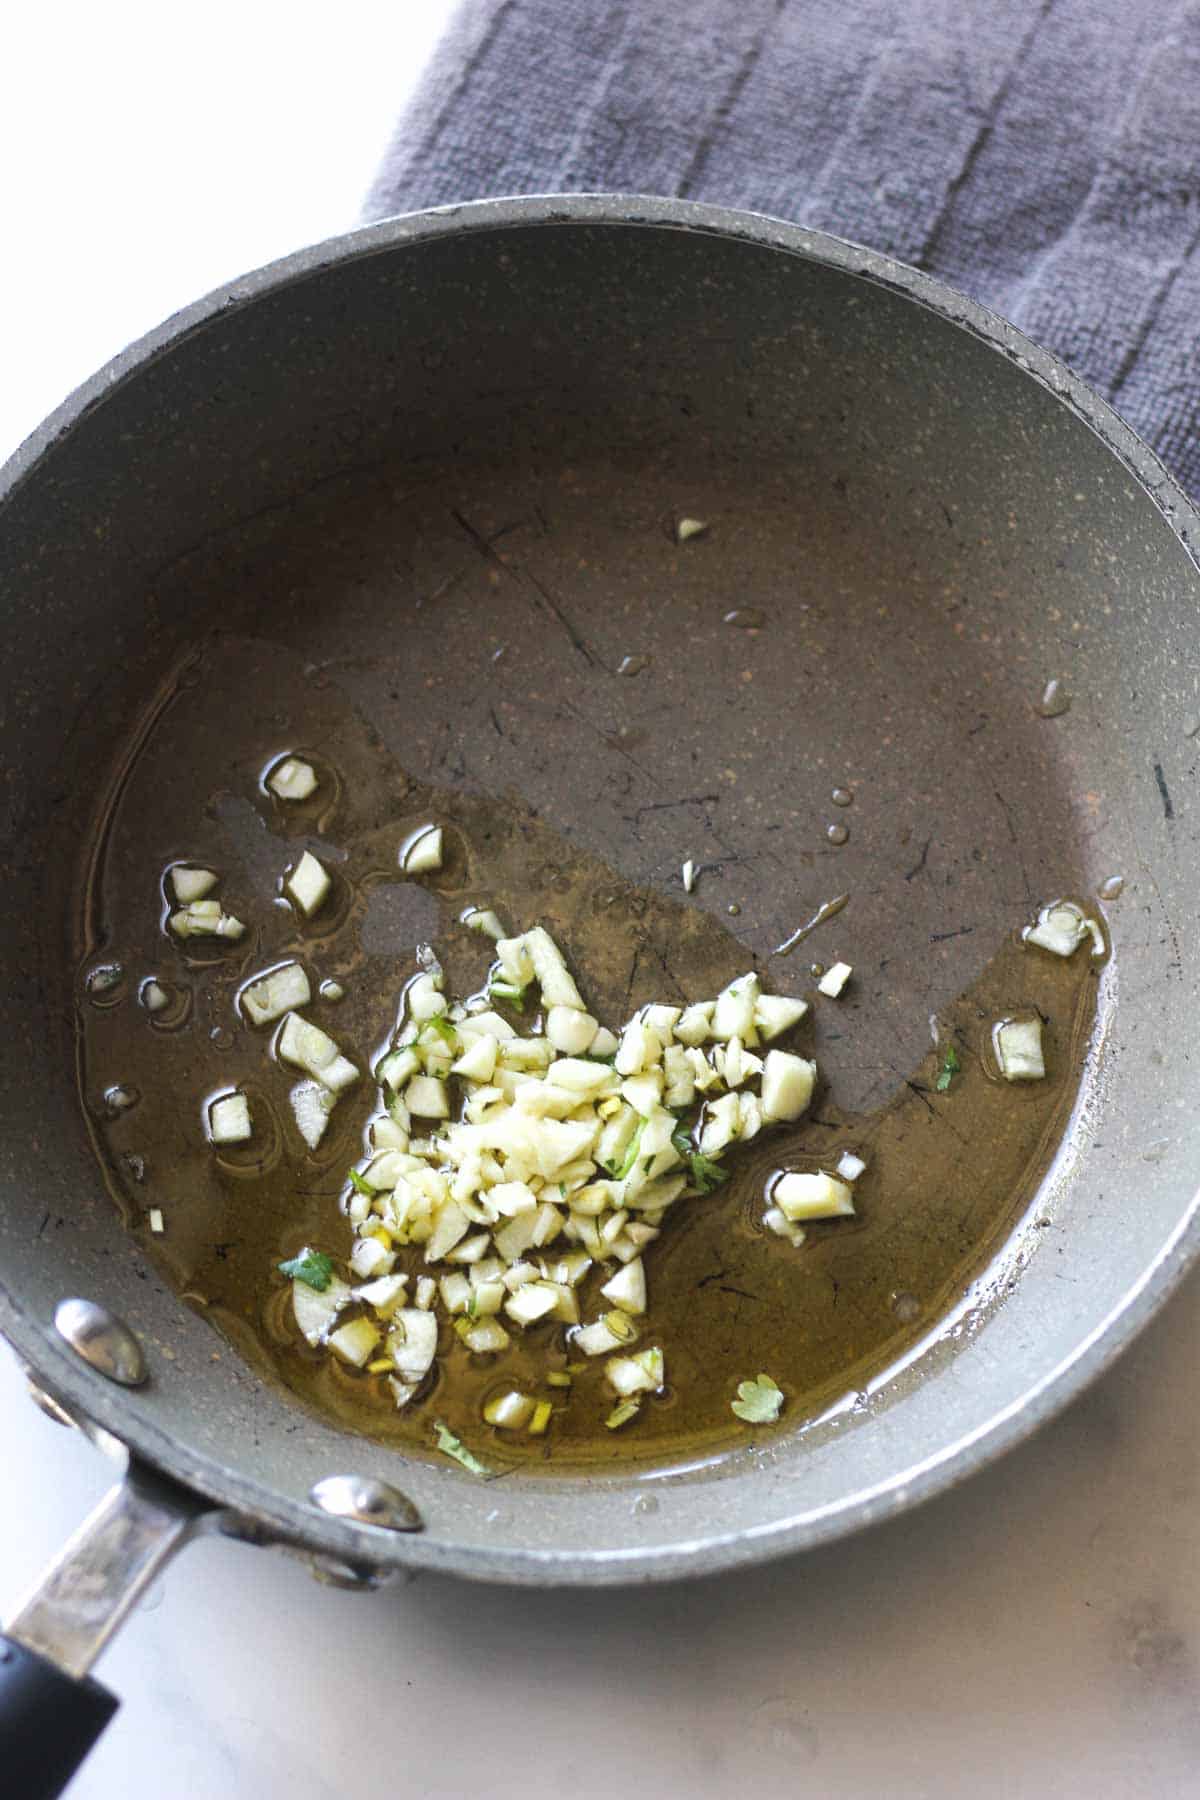 Cockles recipe with white wine and garlic butter - The Top Meal